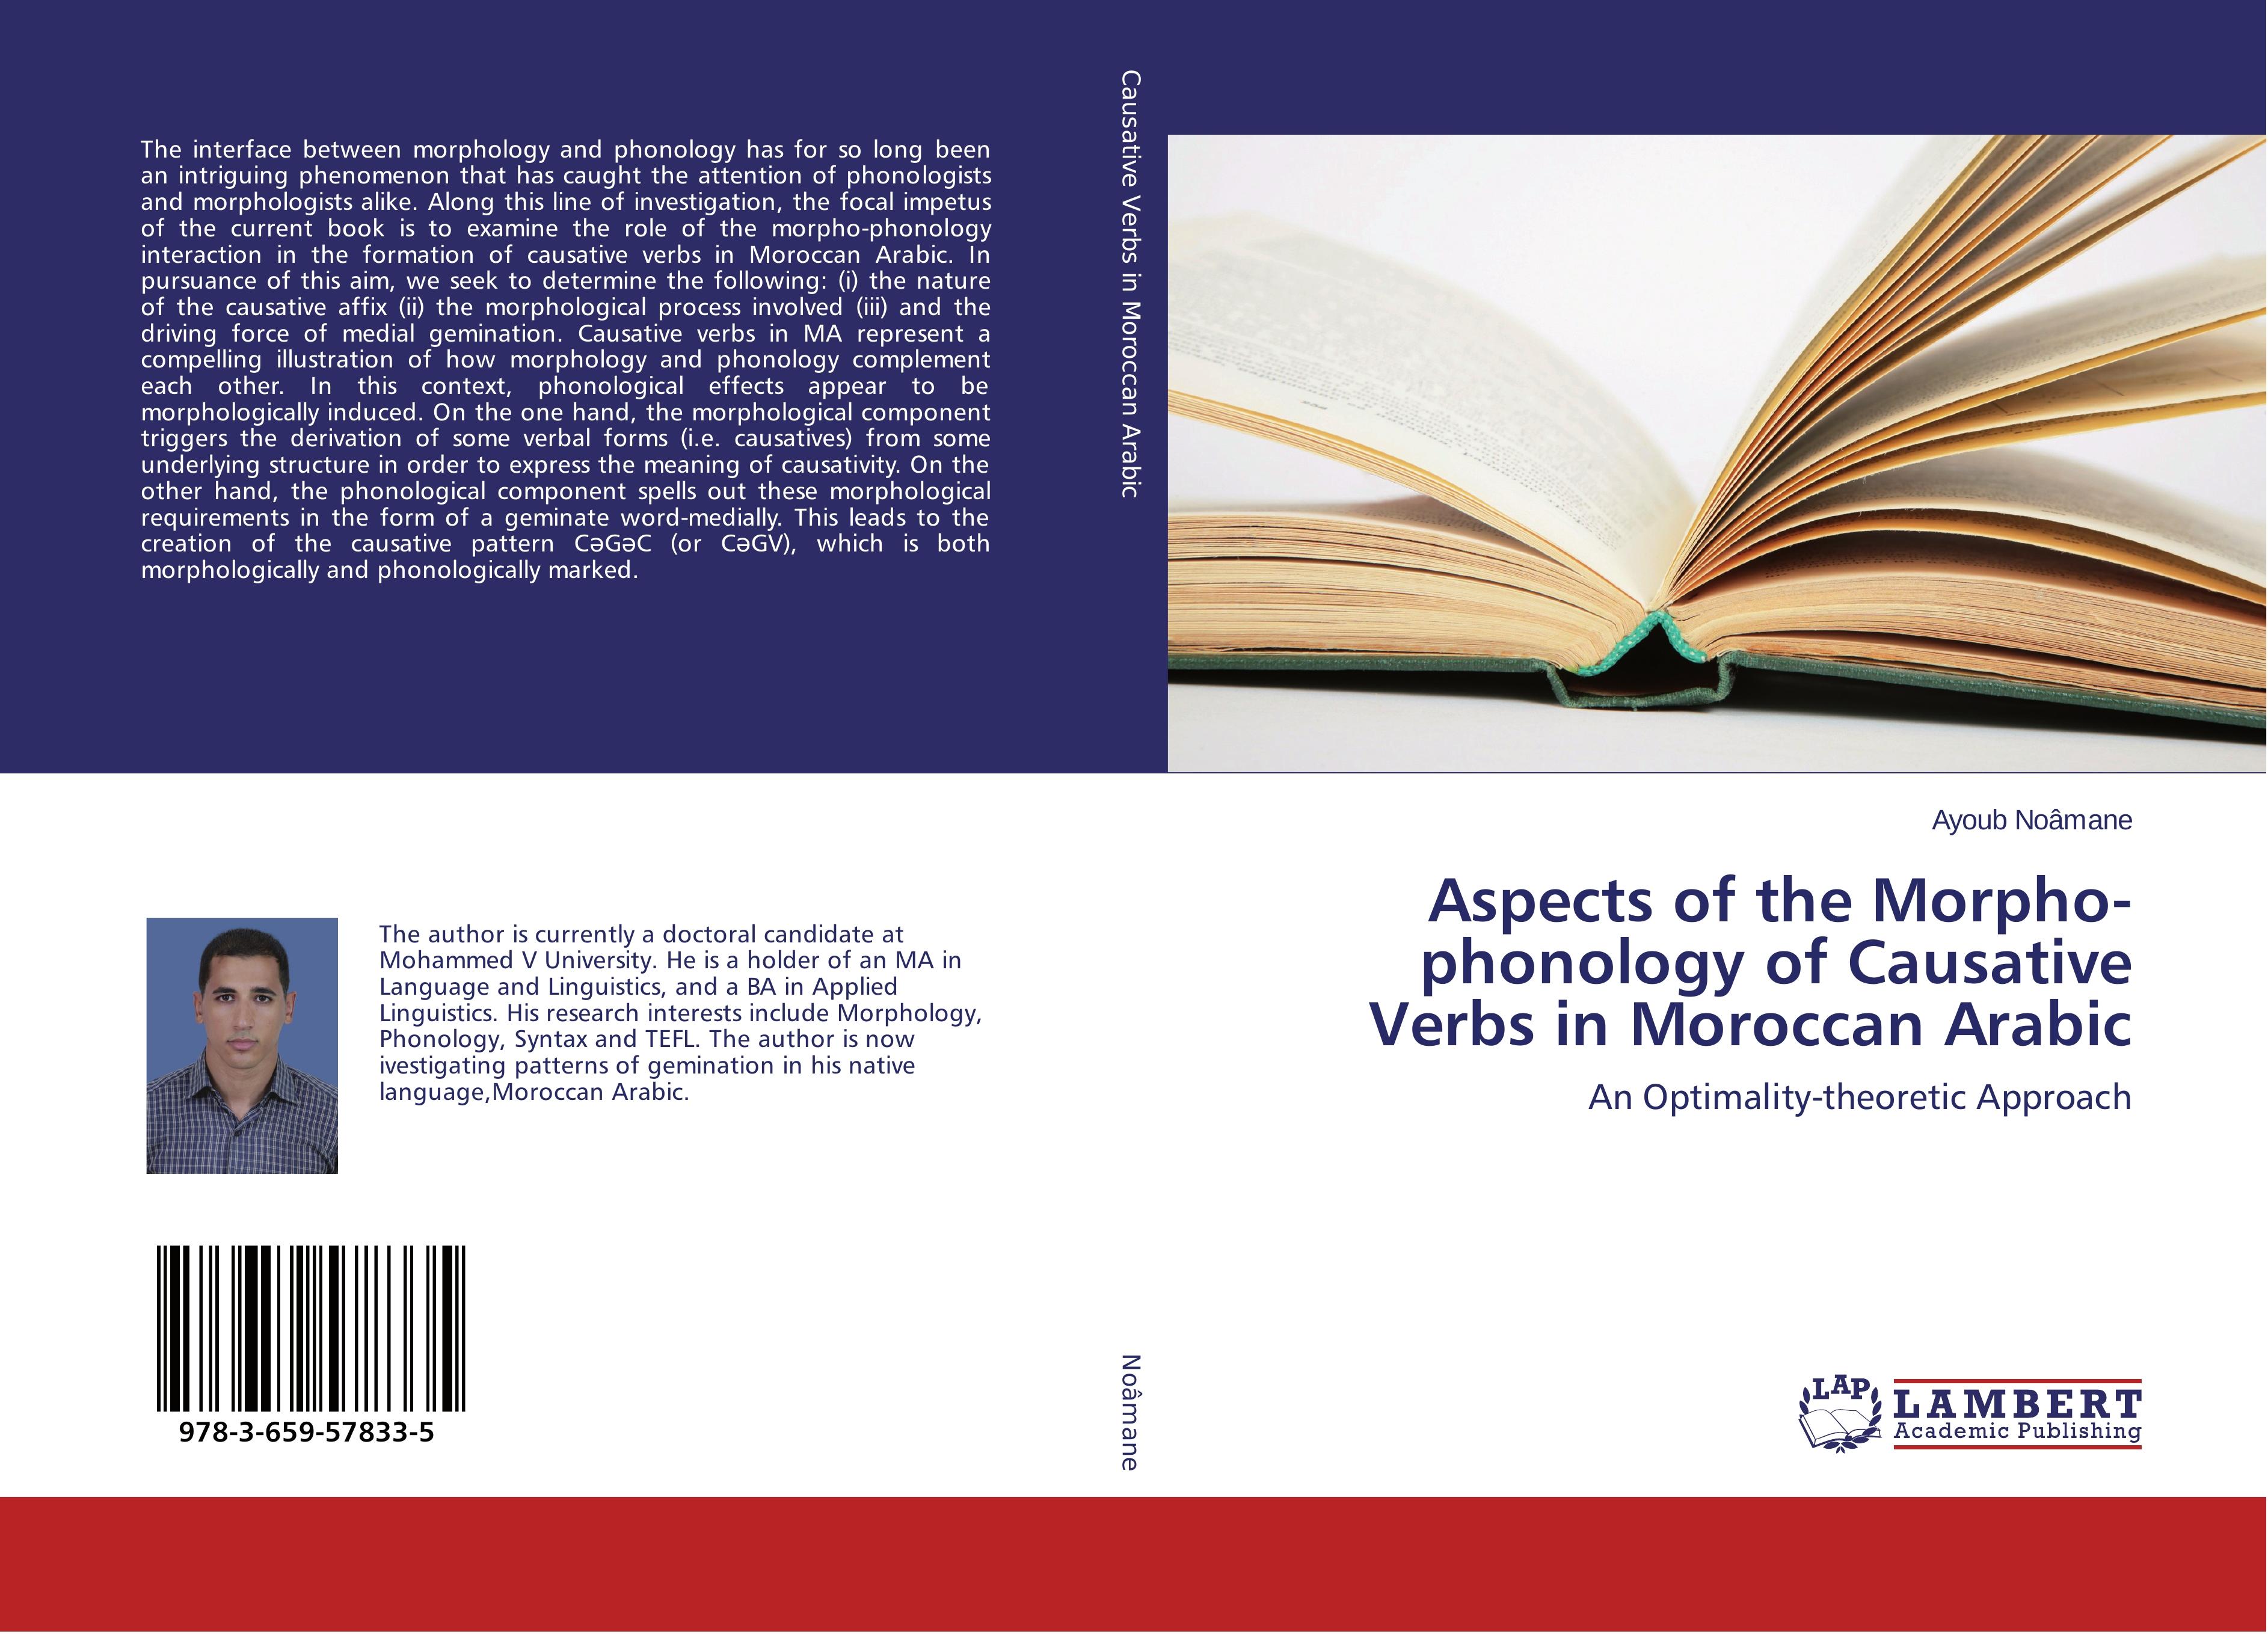 Aspects of the Morpho-phonology of Causative Verbs in Moroccan Arabic - Ayoub Noâmane